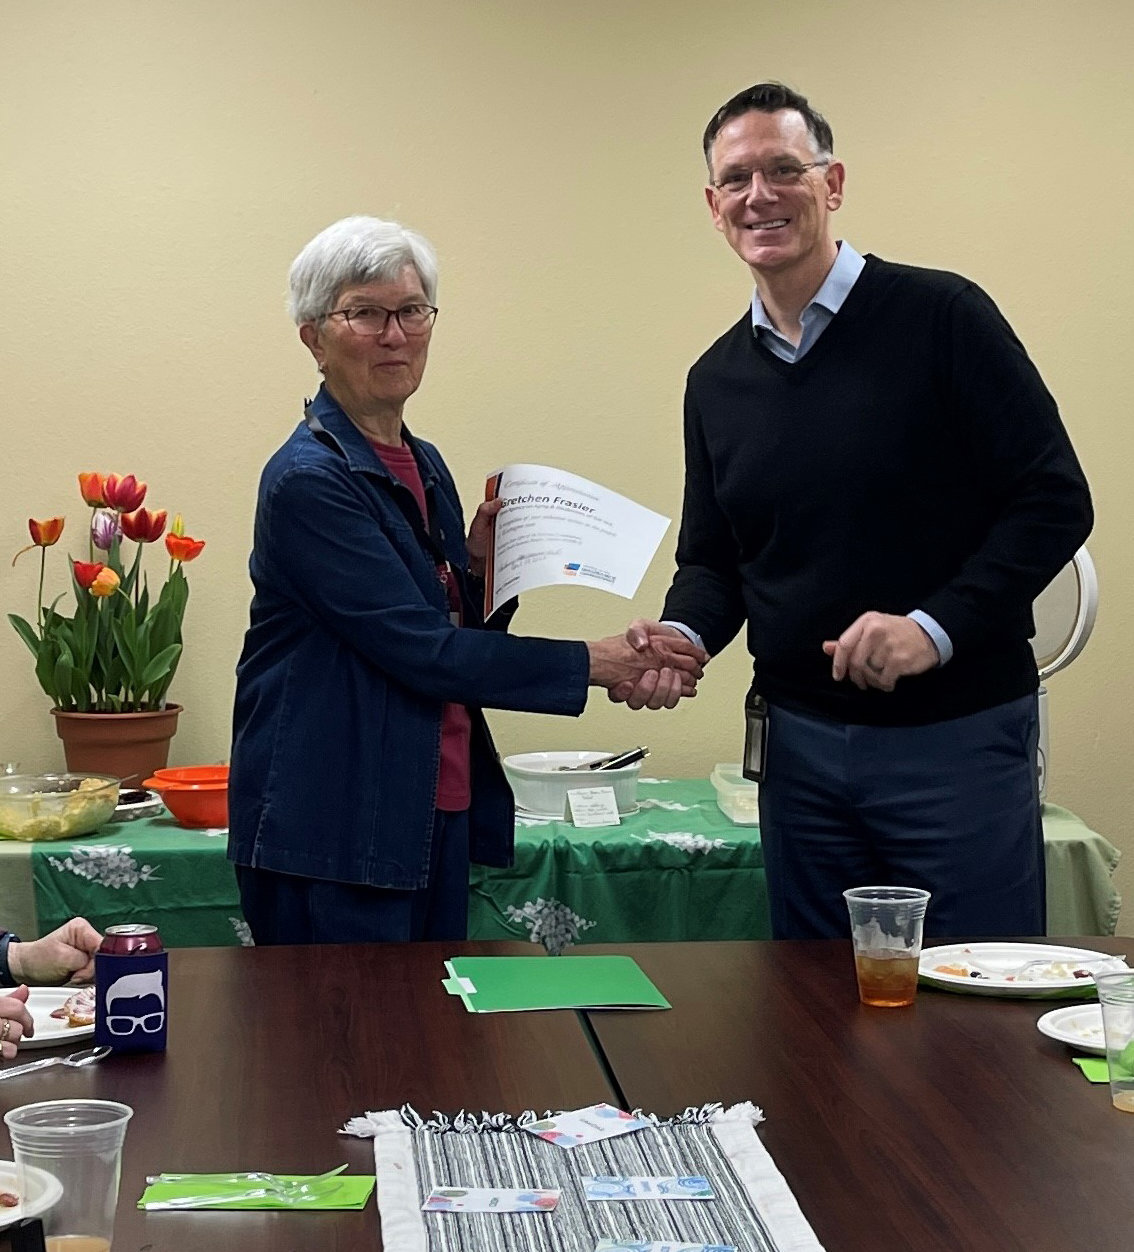 Volunteer Gretchen Frasier receives an award from Mike Reardon, the executive director of the Area Agency on Aging & Disabilities of Southwest Washington, during a SHIBA program volunteer recognition event on April 29.